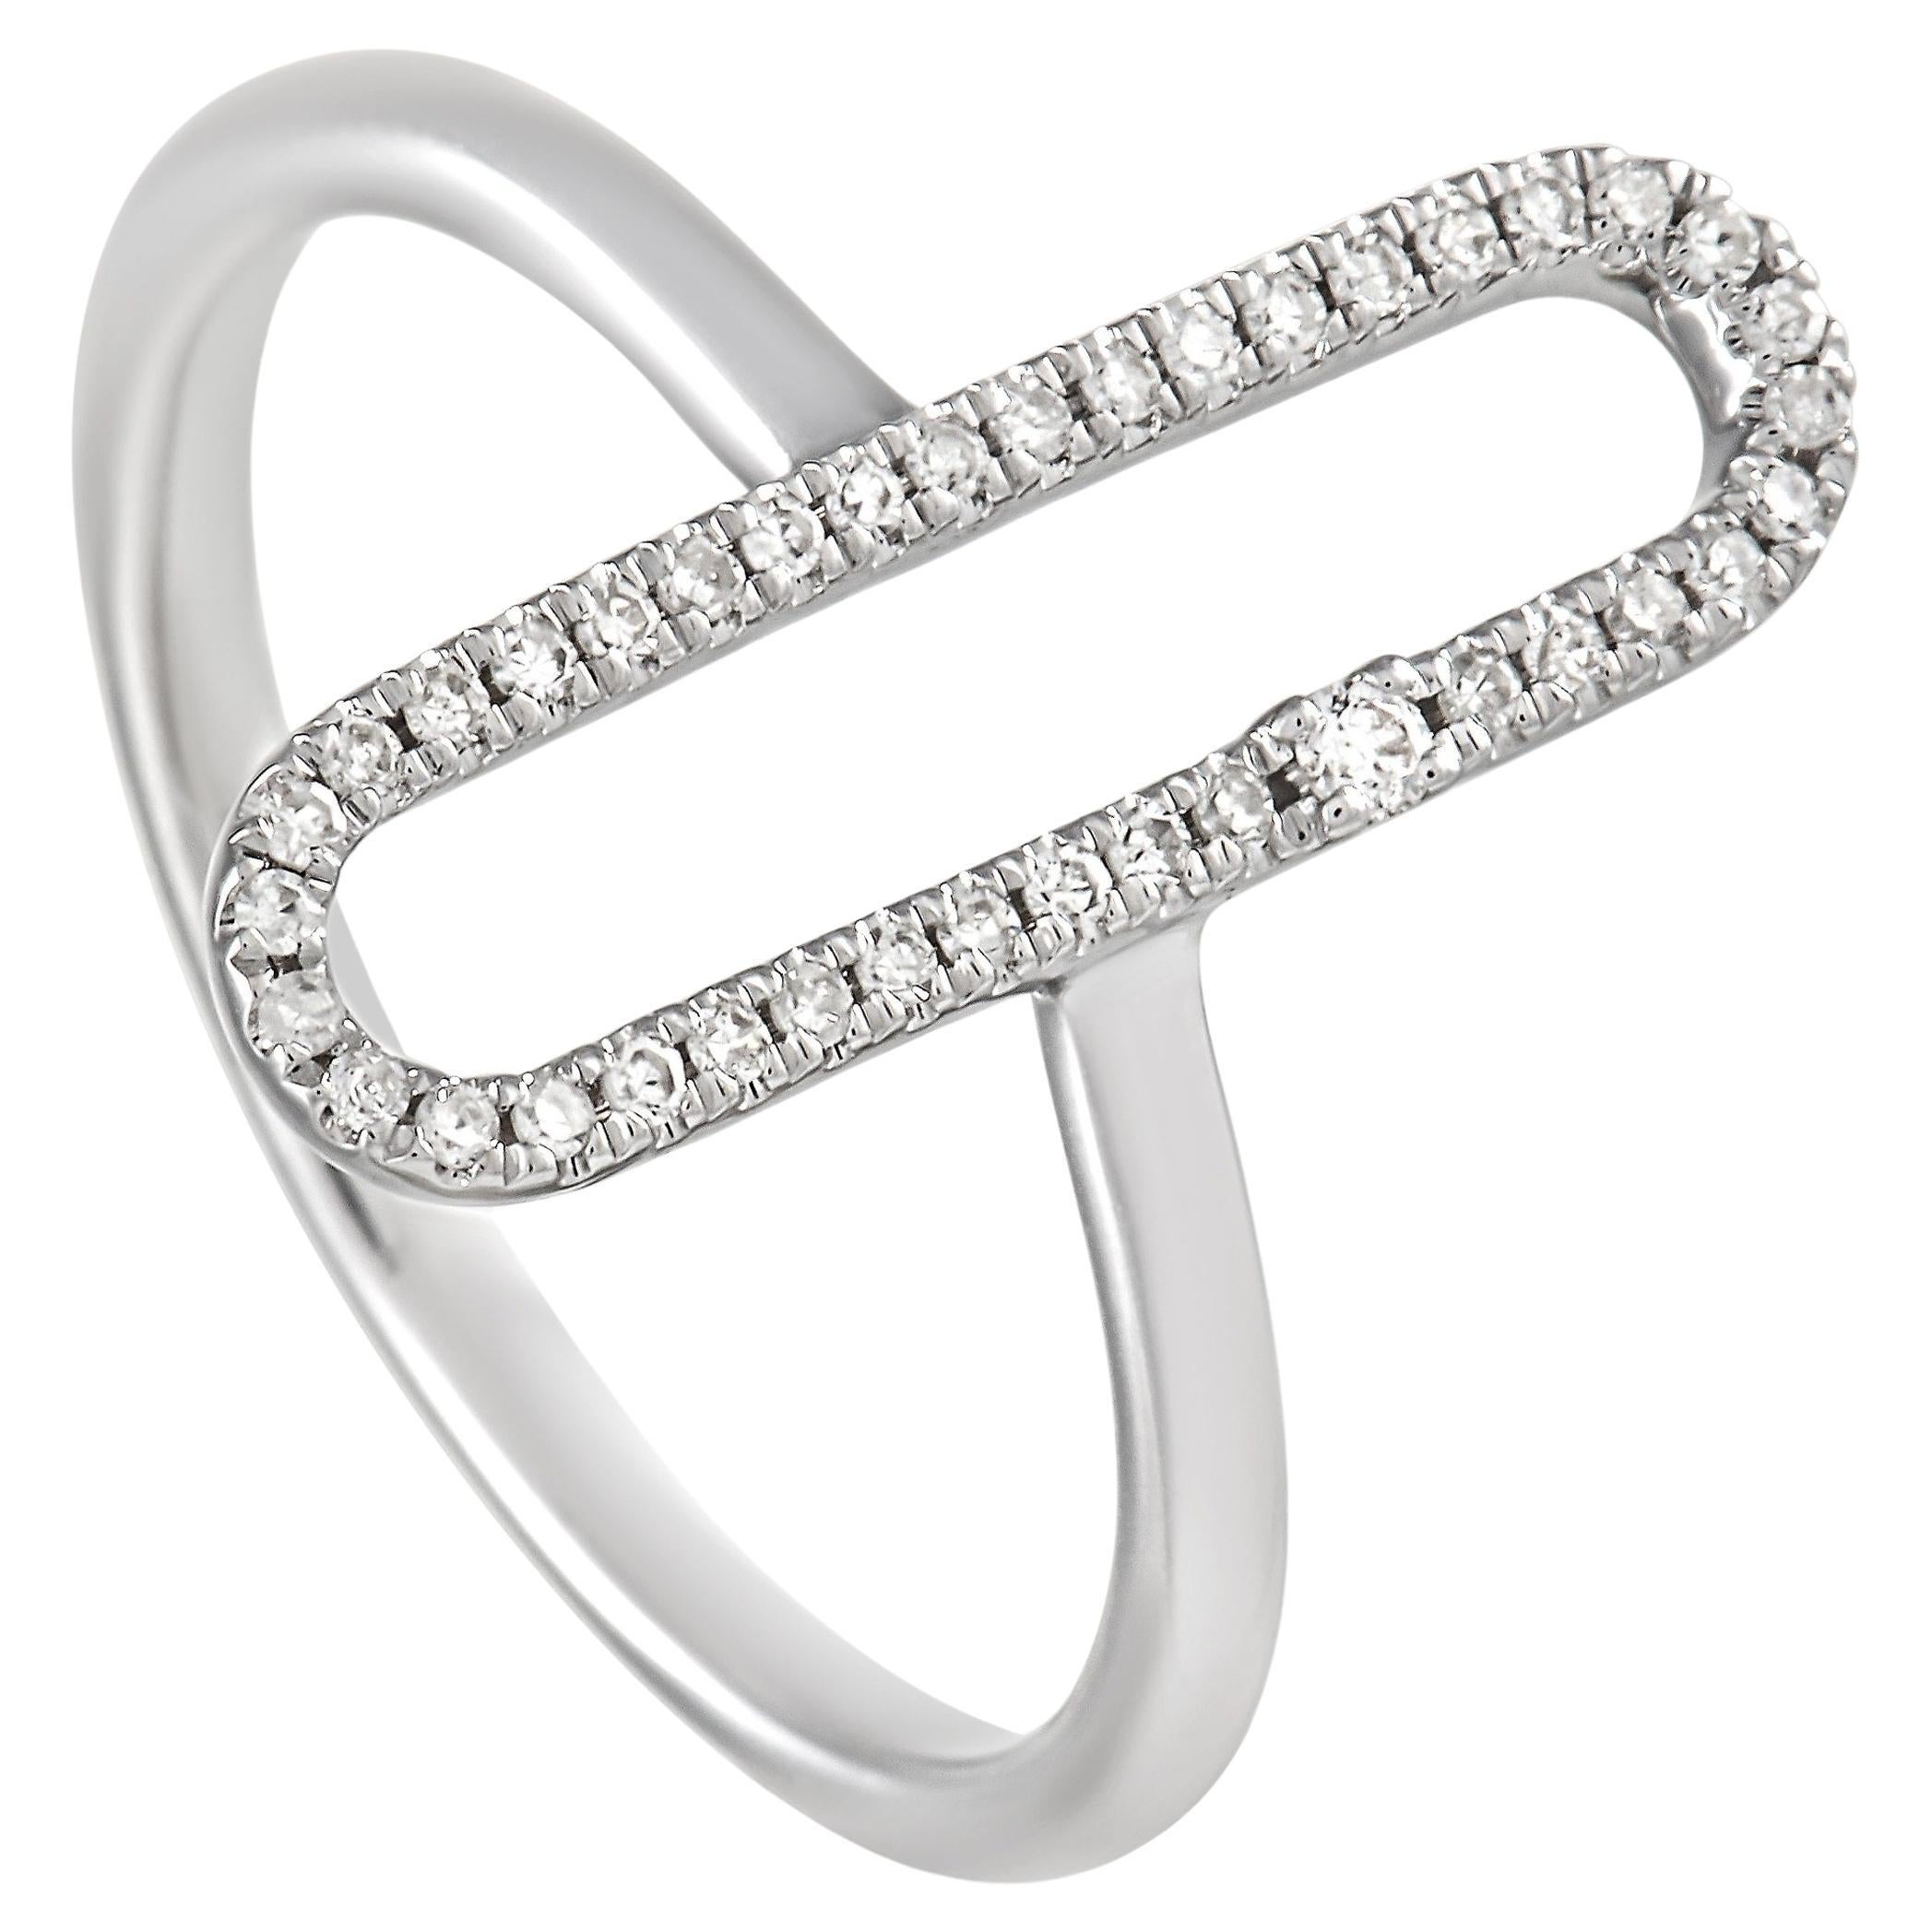 LB Exclusive 14K White Gold 0.15 ct Diamond Ring For Sale